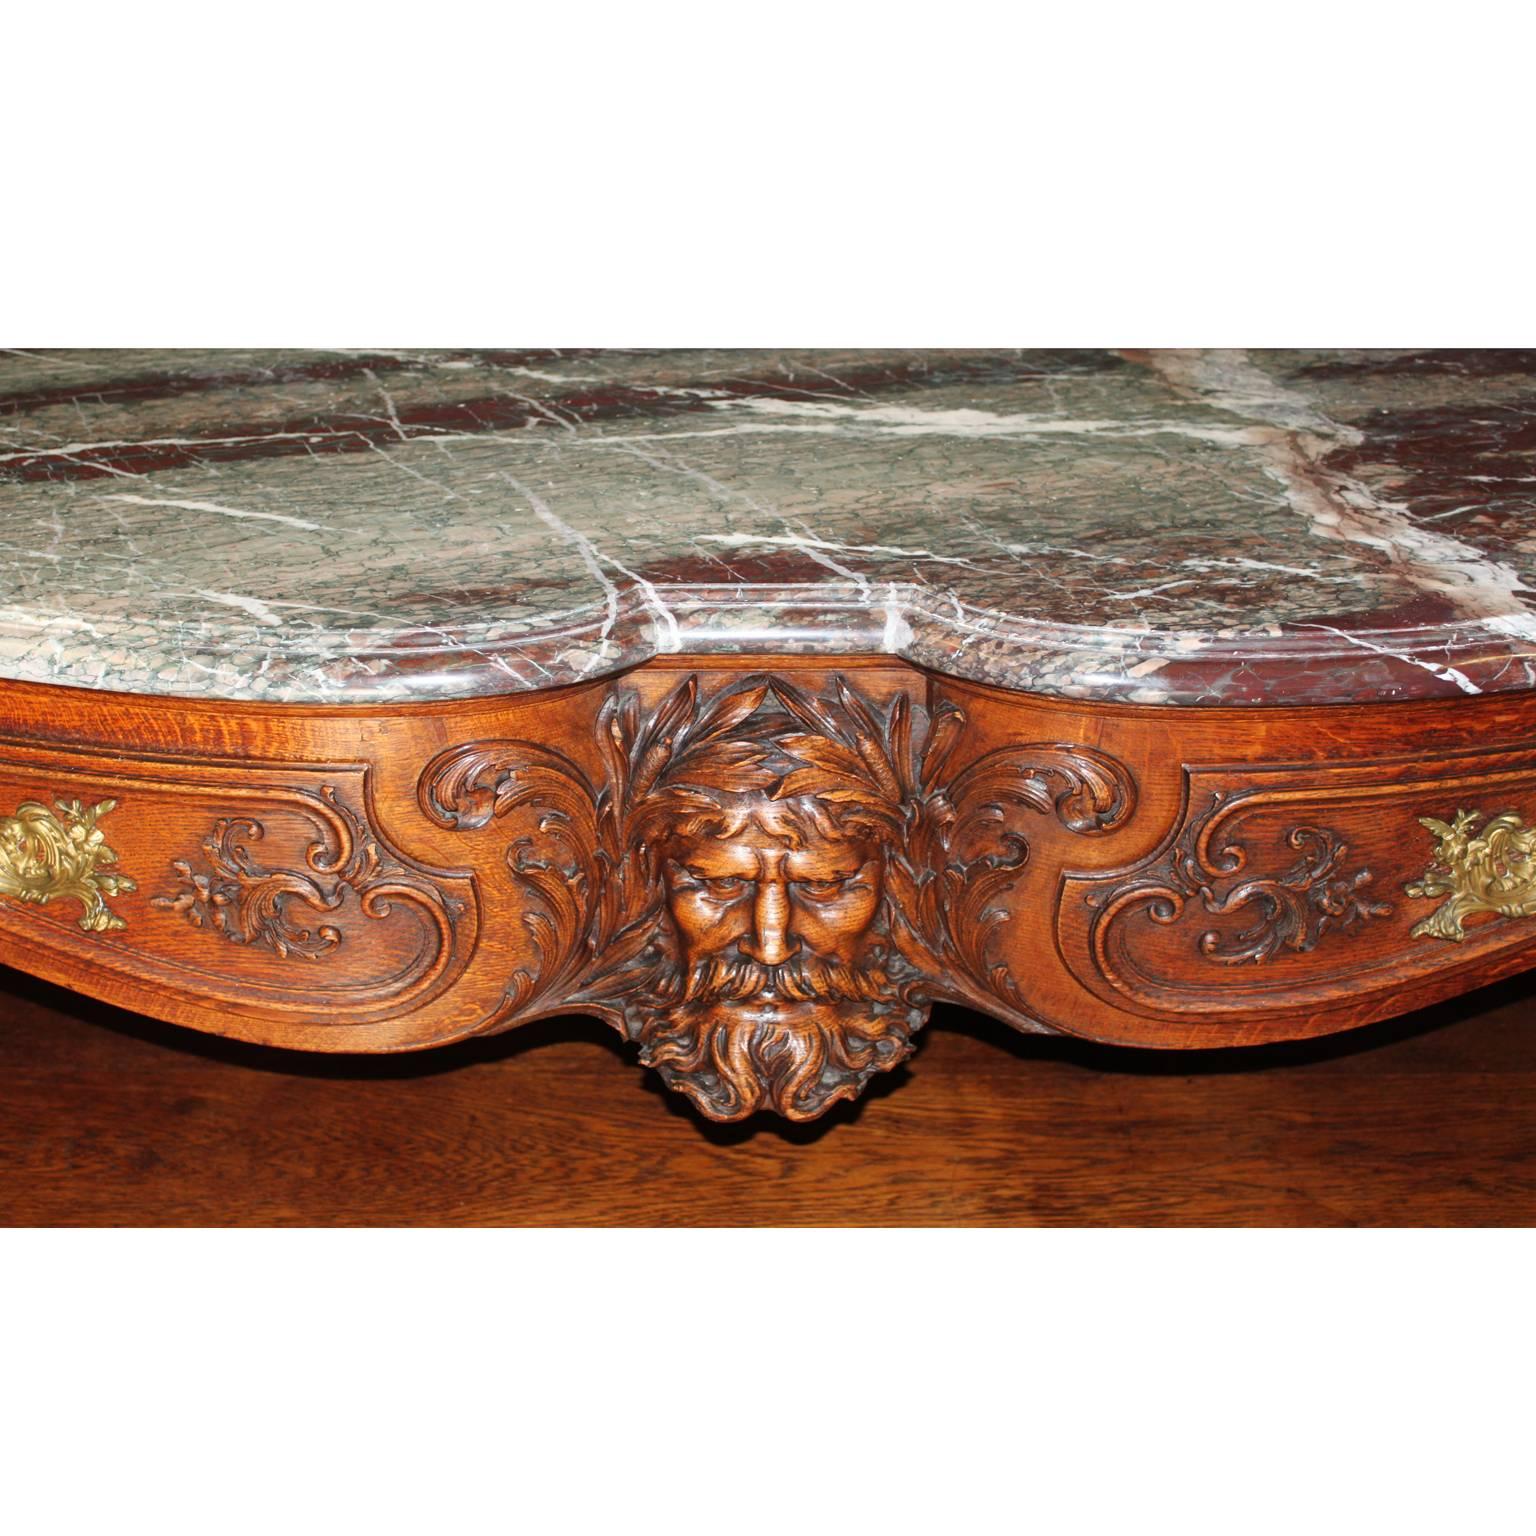 Baroque Revival French Baroque 19th Century Louis XV Style Finely Carved Walnut Buffet Console For Sale